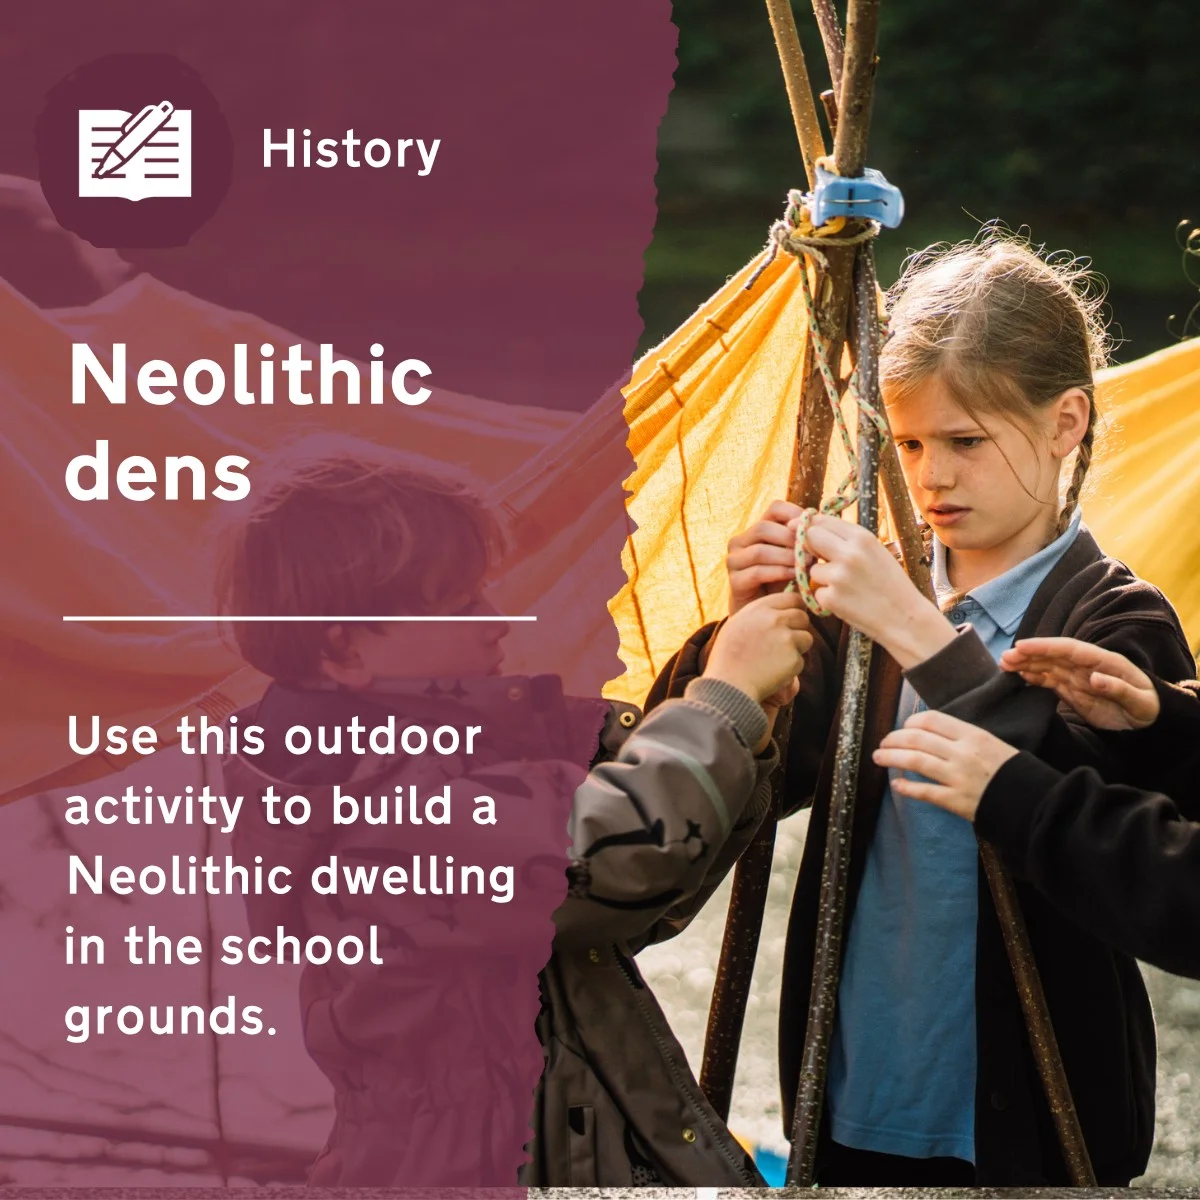 Use this primary history activity to support understanding of living in the Neolithic period. This outdoor lesson idea encourages pupils to draw on their knowledge and creativity to build Neolithic dwellings in the school grounds.